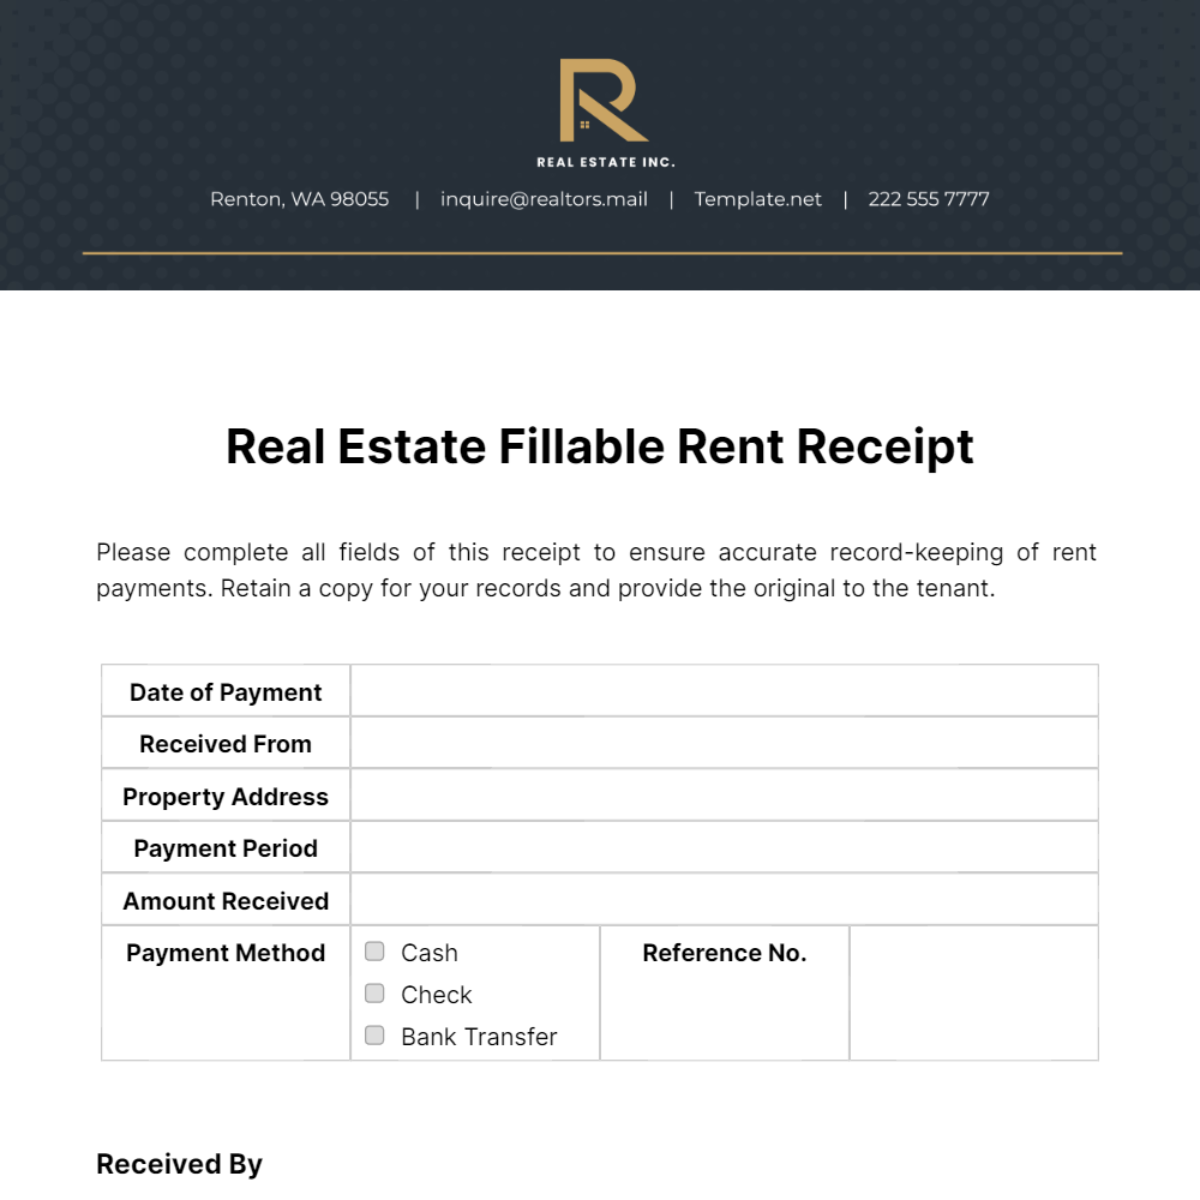 Real Estate Fillable Rent Receipt Template